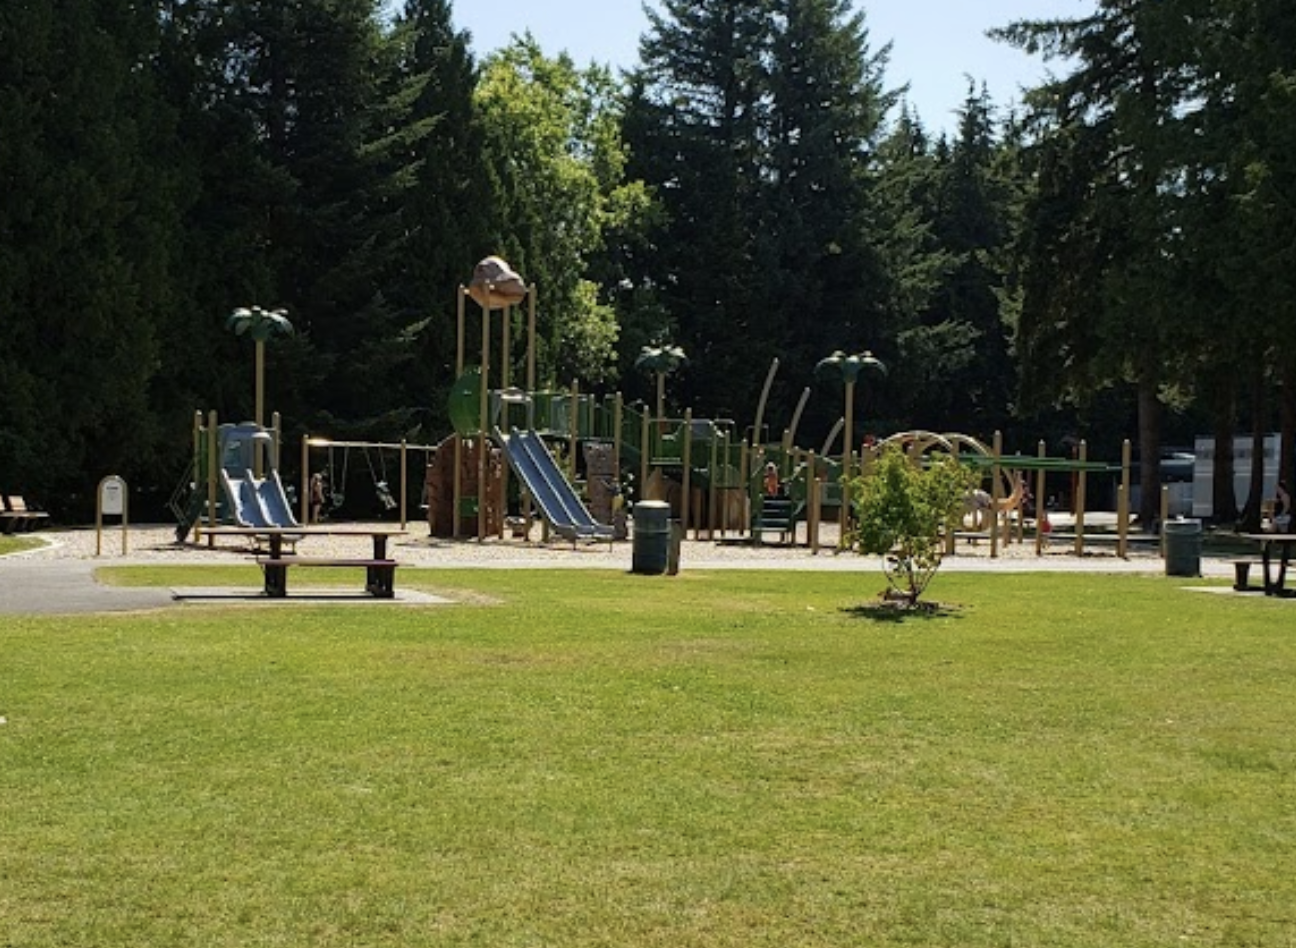 Man arrested after firing shots into air in Langley City Park